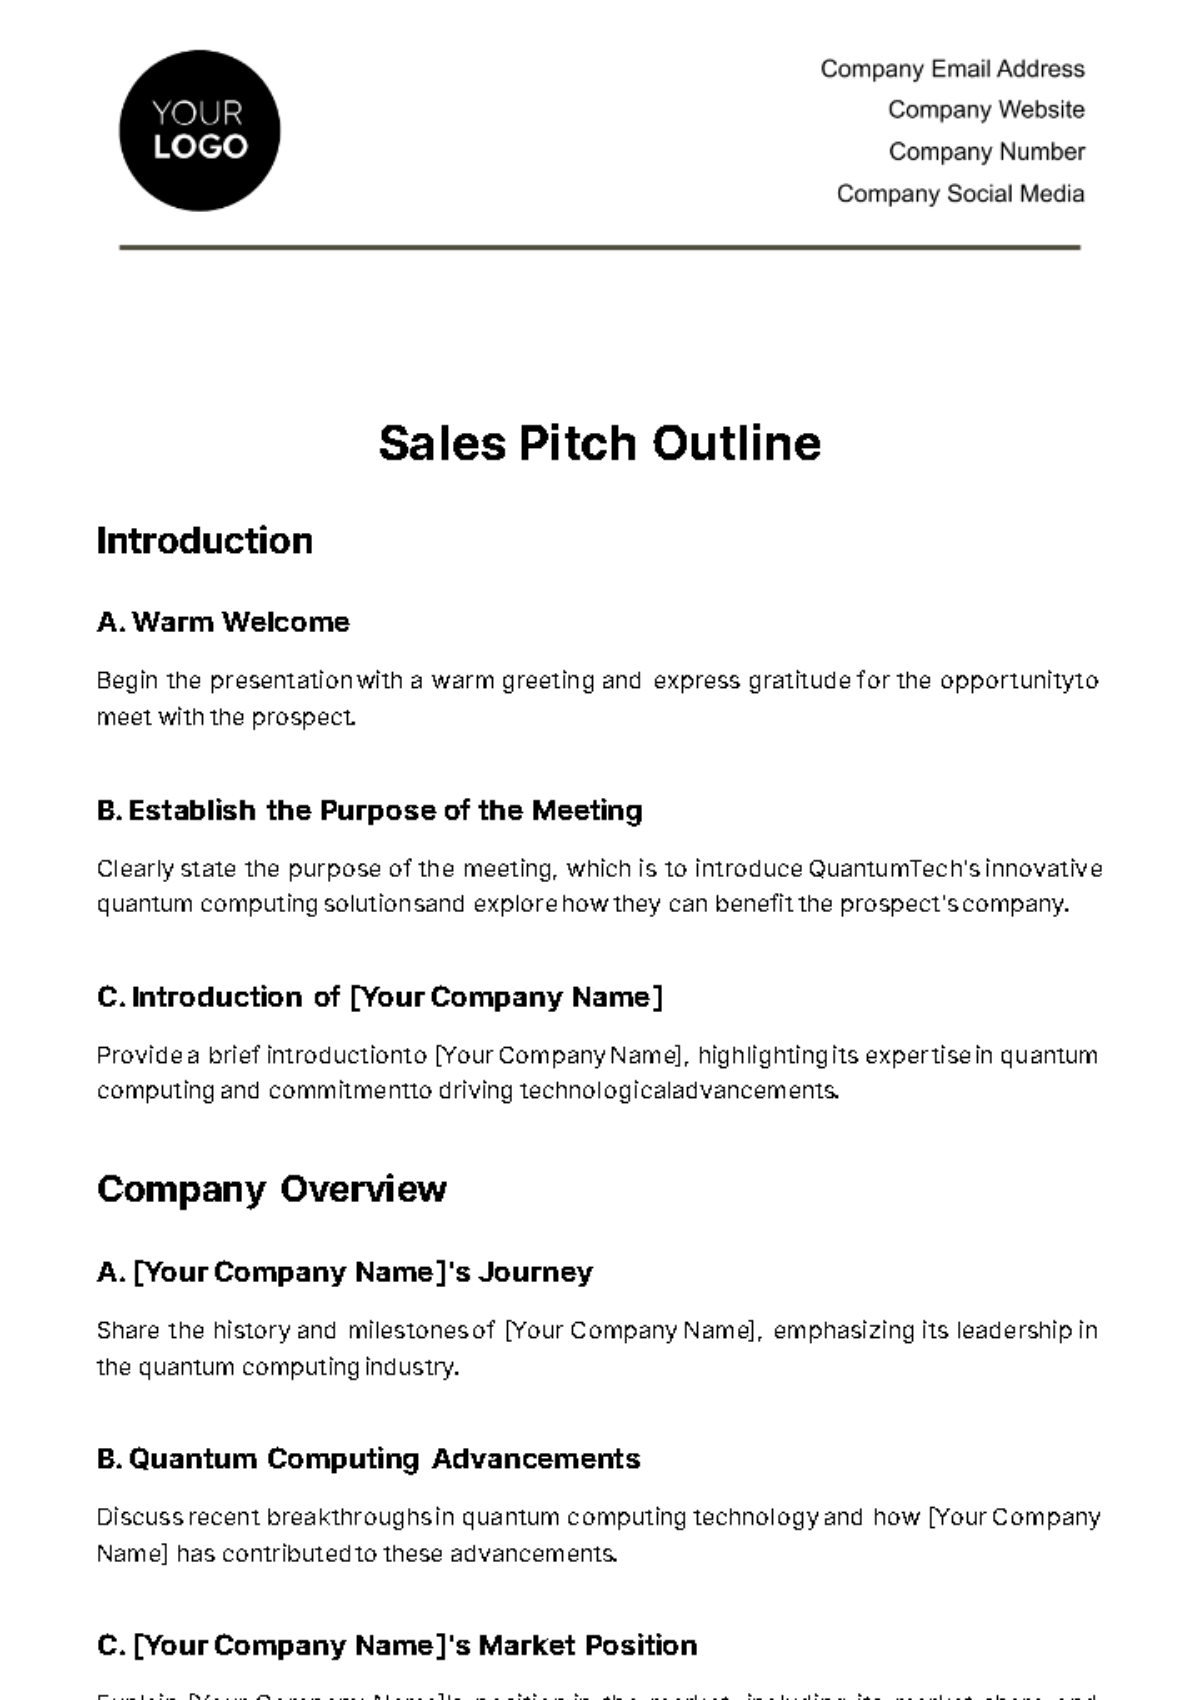 Sales Pitch Outline Template